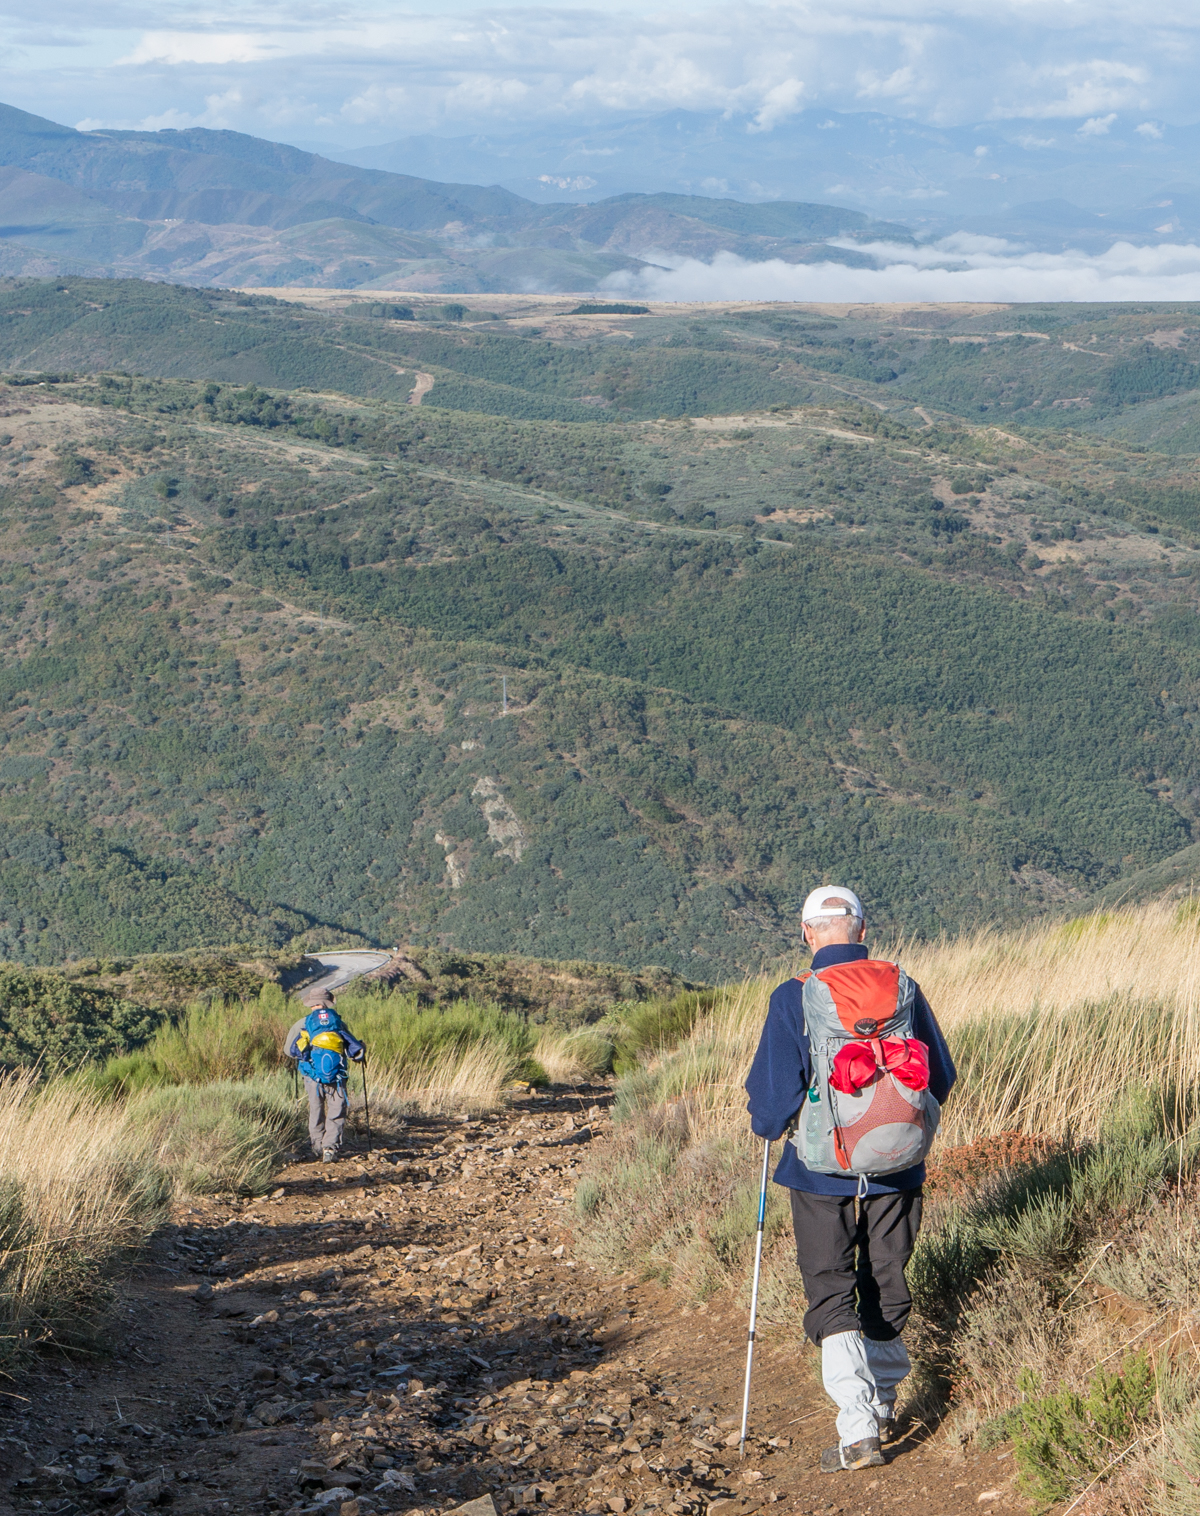 Pilgrims on a mountainous section of the Camino Francs approximately 7 km (4.3 miles) west of Manjarn | Photo by Mike Hudak